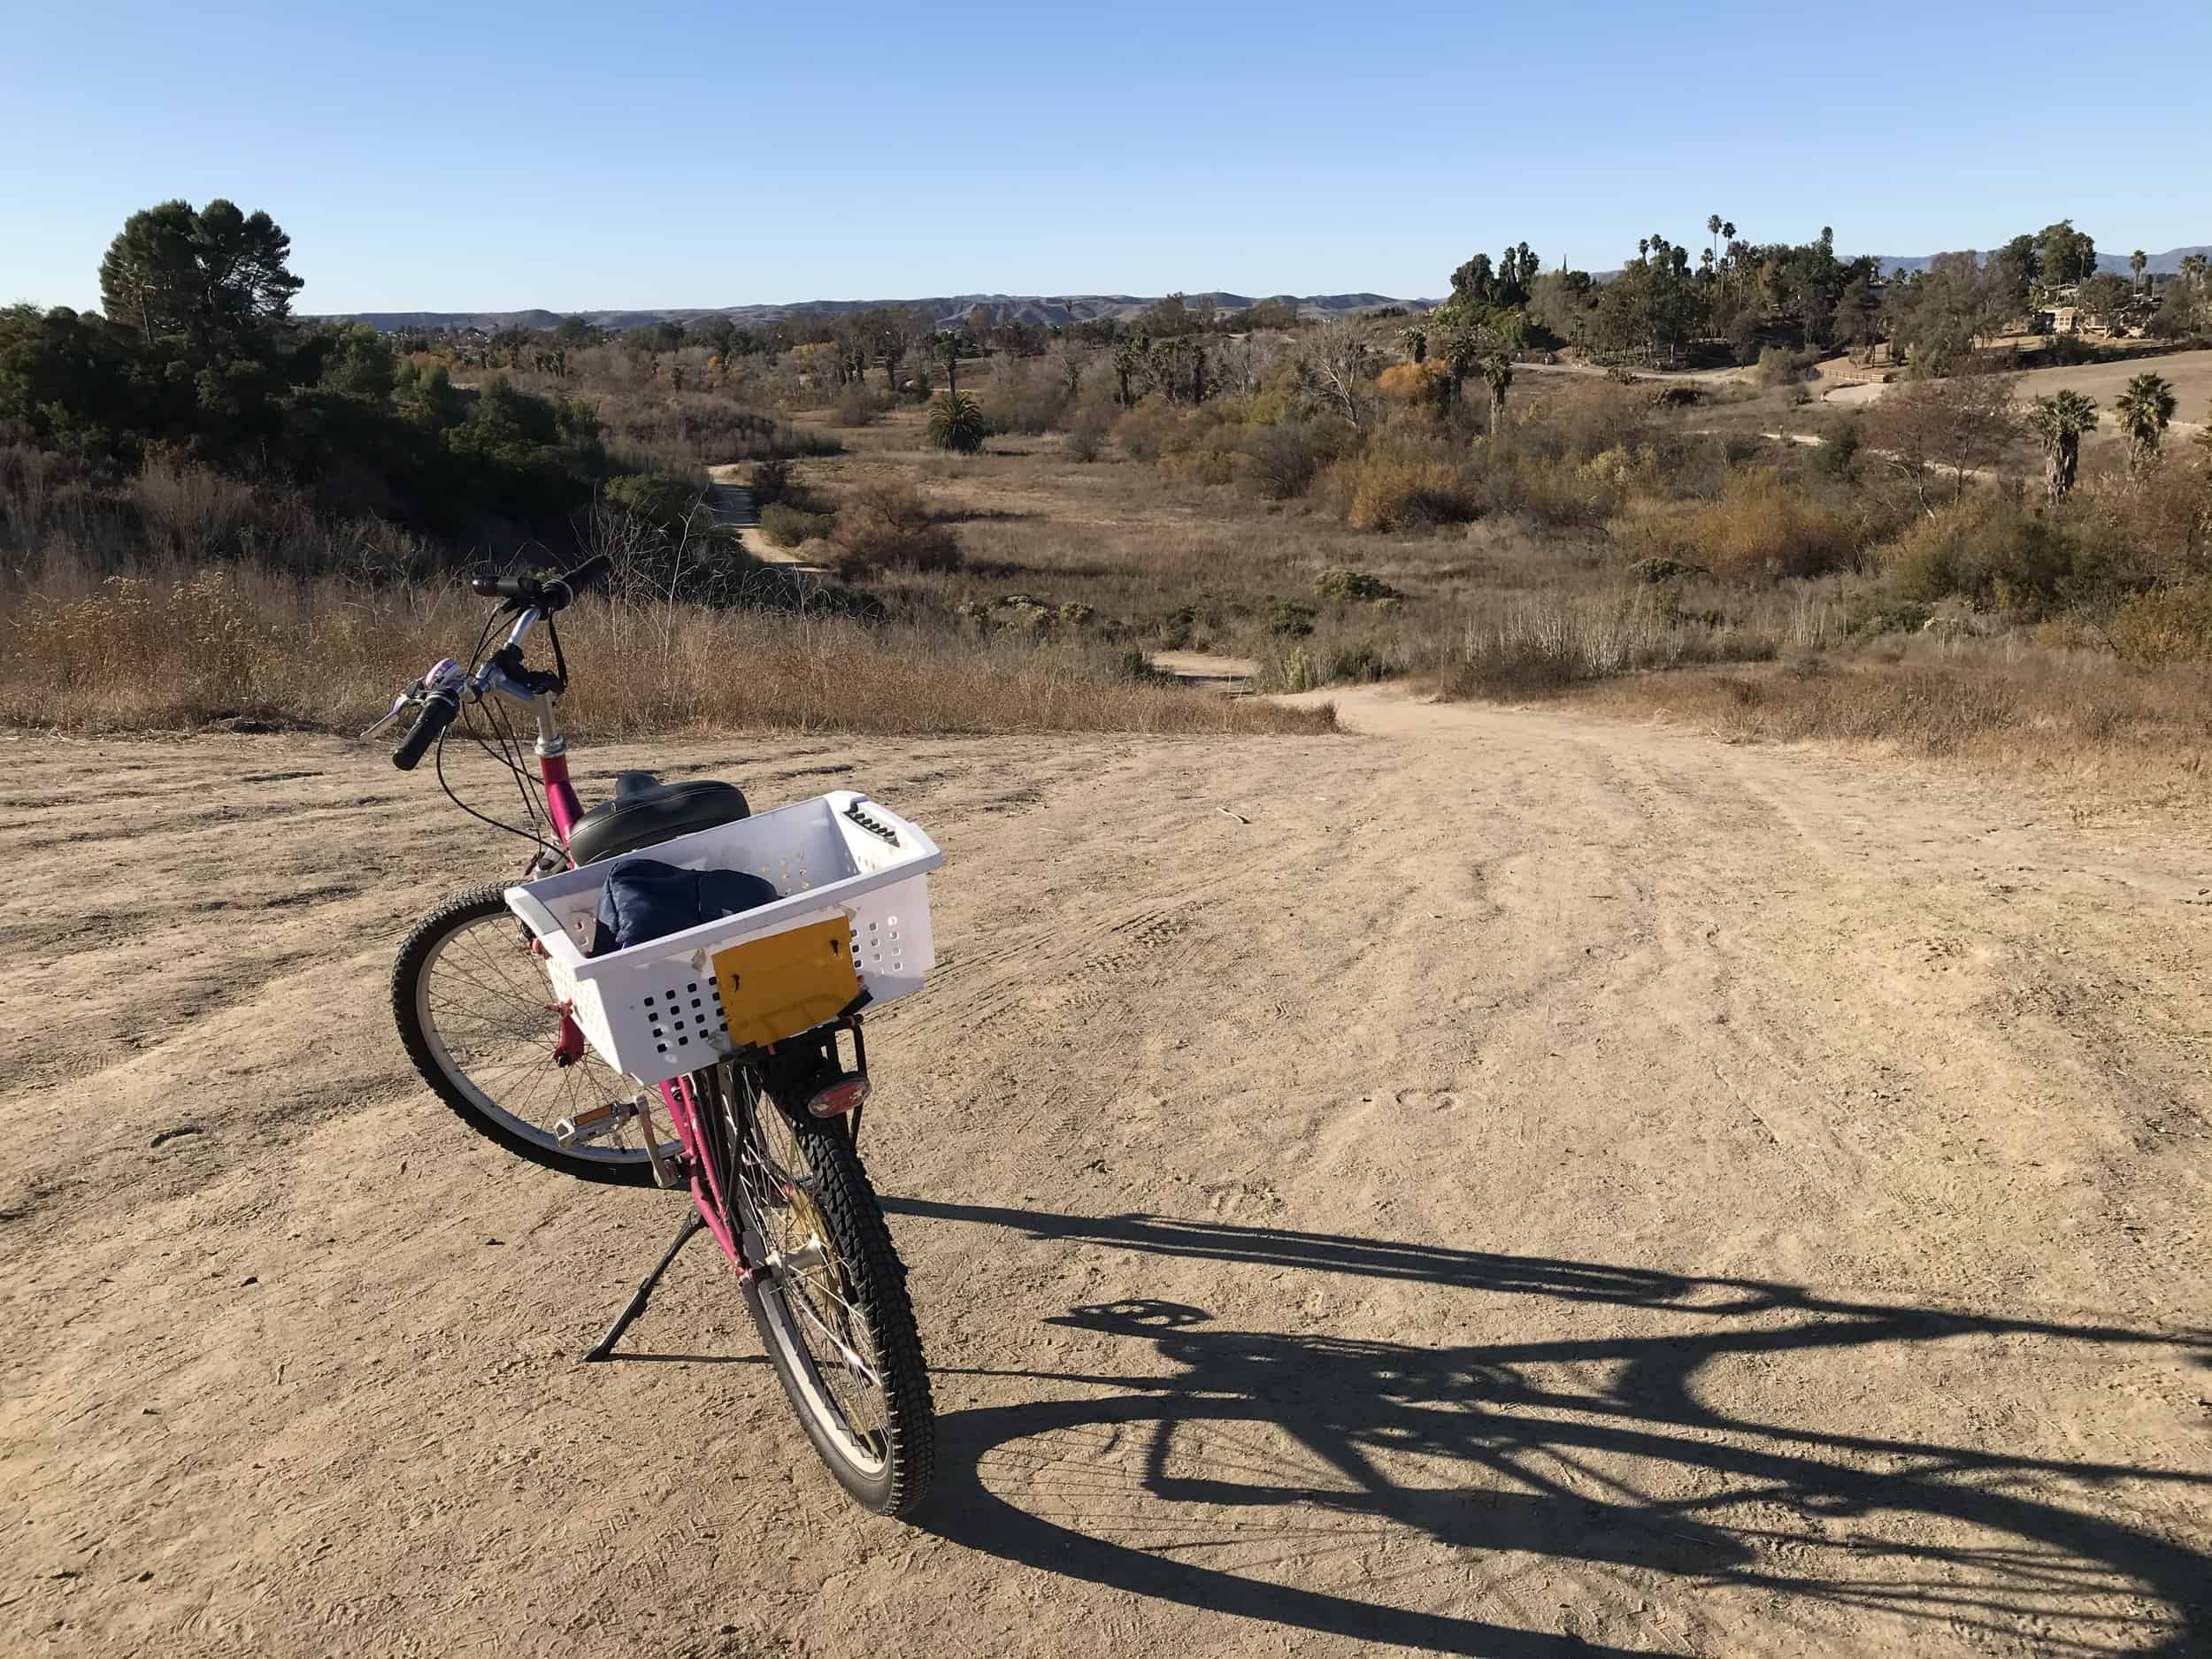 Meggie's pink bike on top of a dirt hill overlooking tan desert bushes and trees. A clear blue sky.  Guajome Regional Park at the eastern end of the San Luis Rey River Trail in Oceanside, California, United States of America